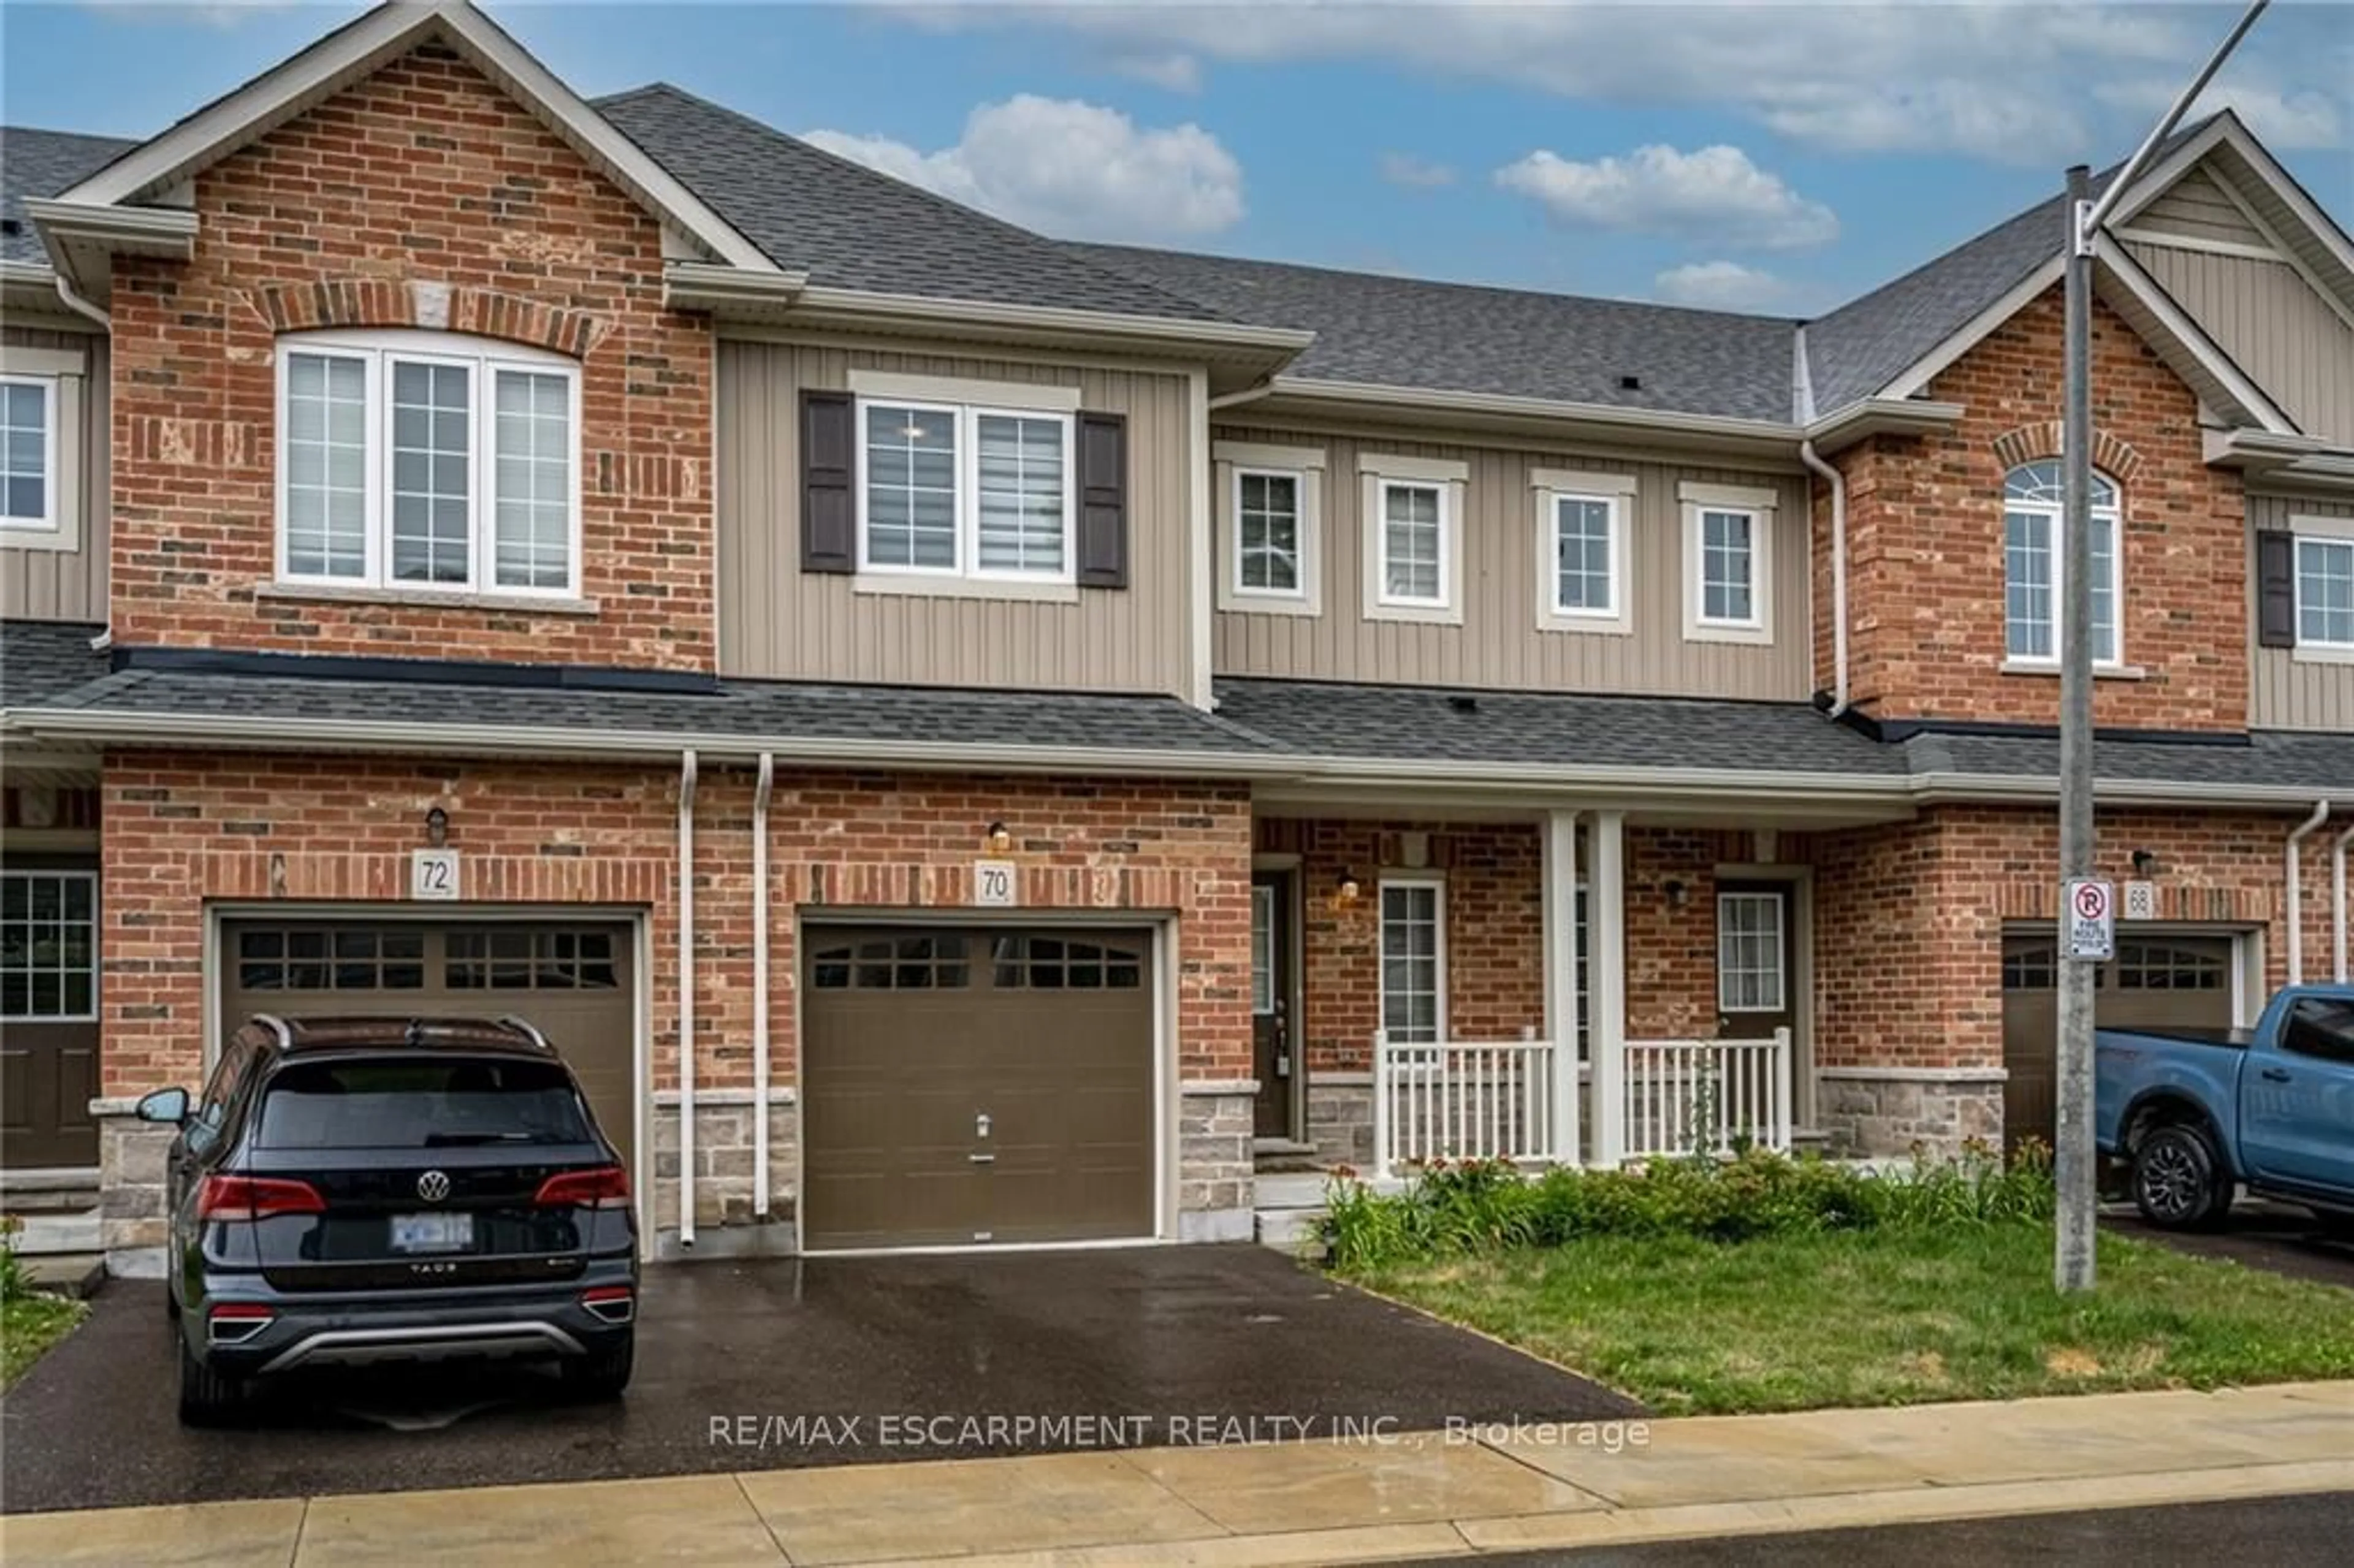 Home with brick exterior material for 70 Dewberry Dr, Kitchener Ontario N2B 2G9